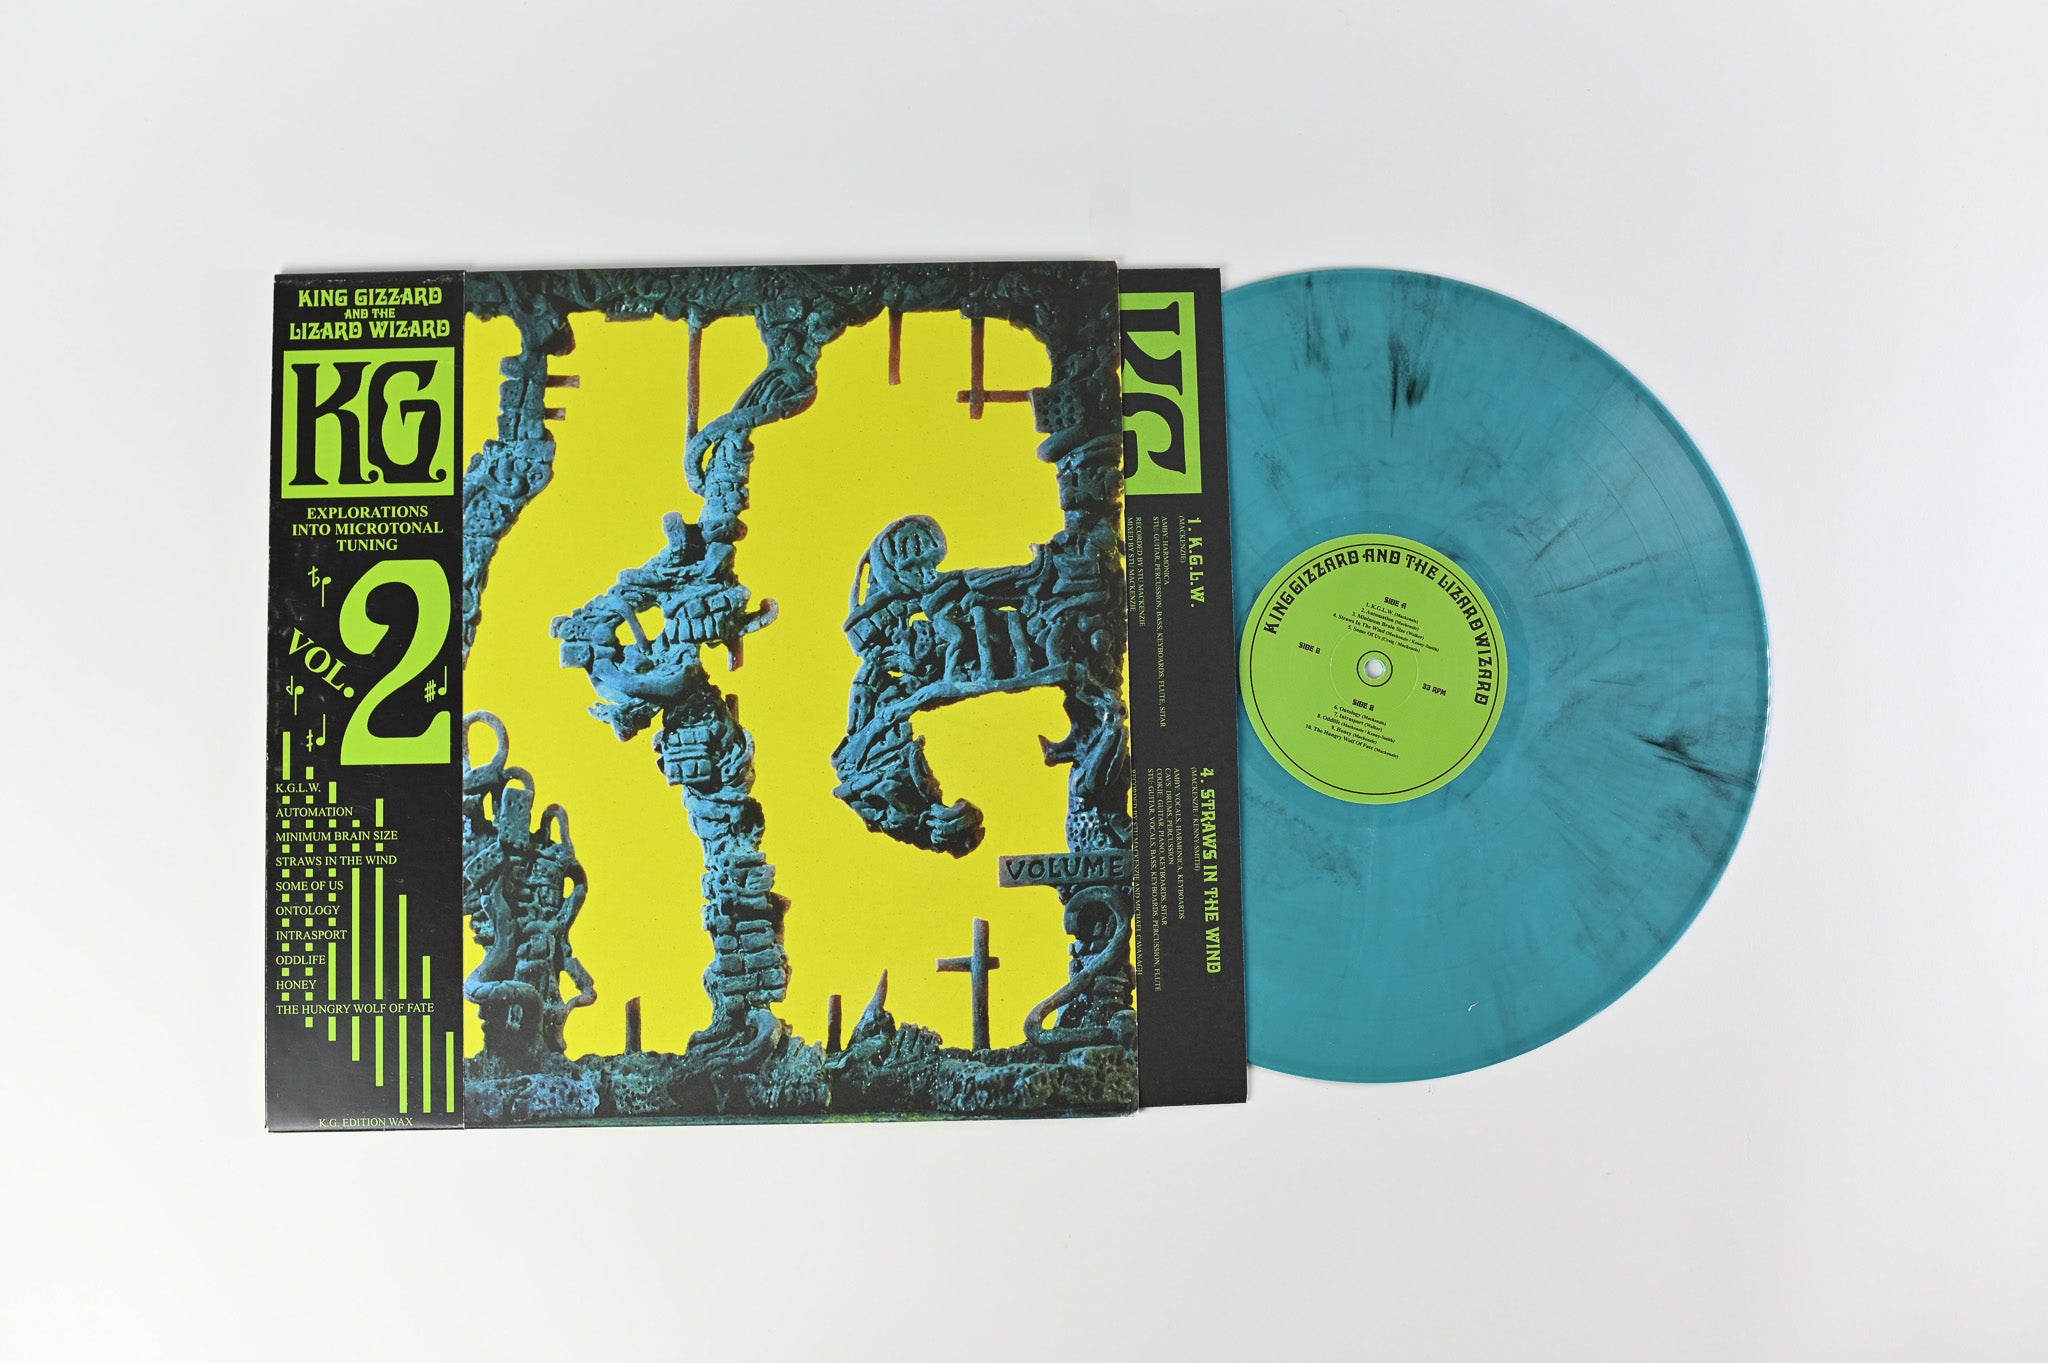 King Gizzard And The Lizard Wizard - K.G. (Explorations Into Microtonal Tuning Volume 2) Self-Released on Blue w/Black Smoke Vinyl